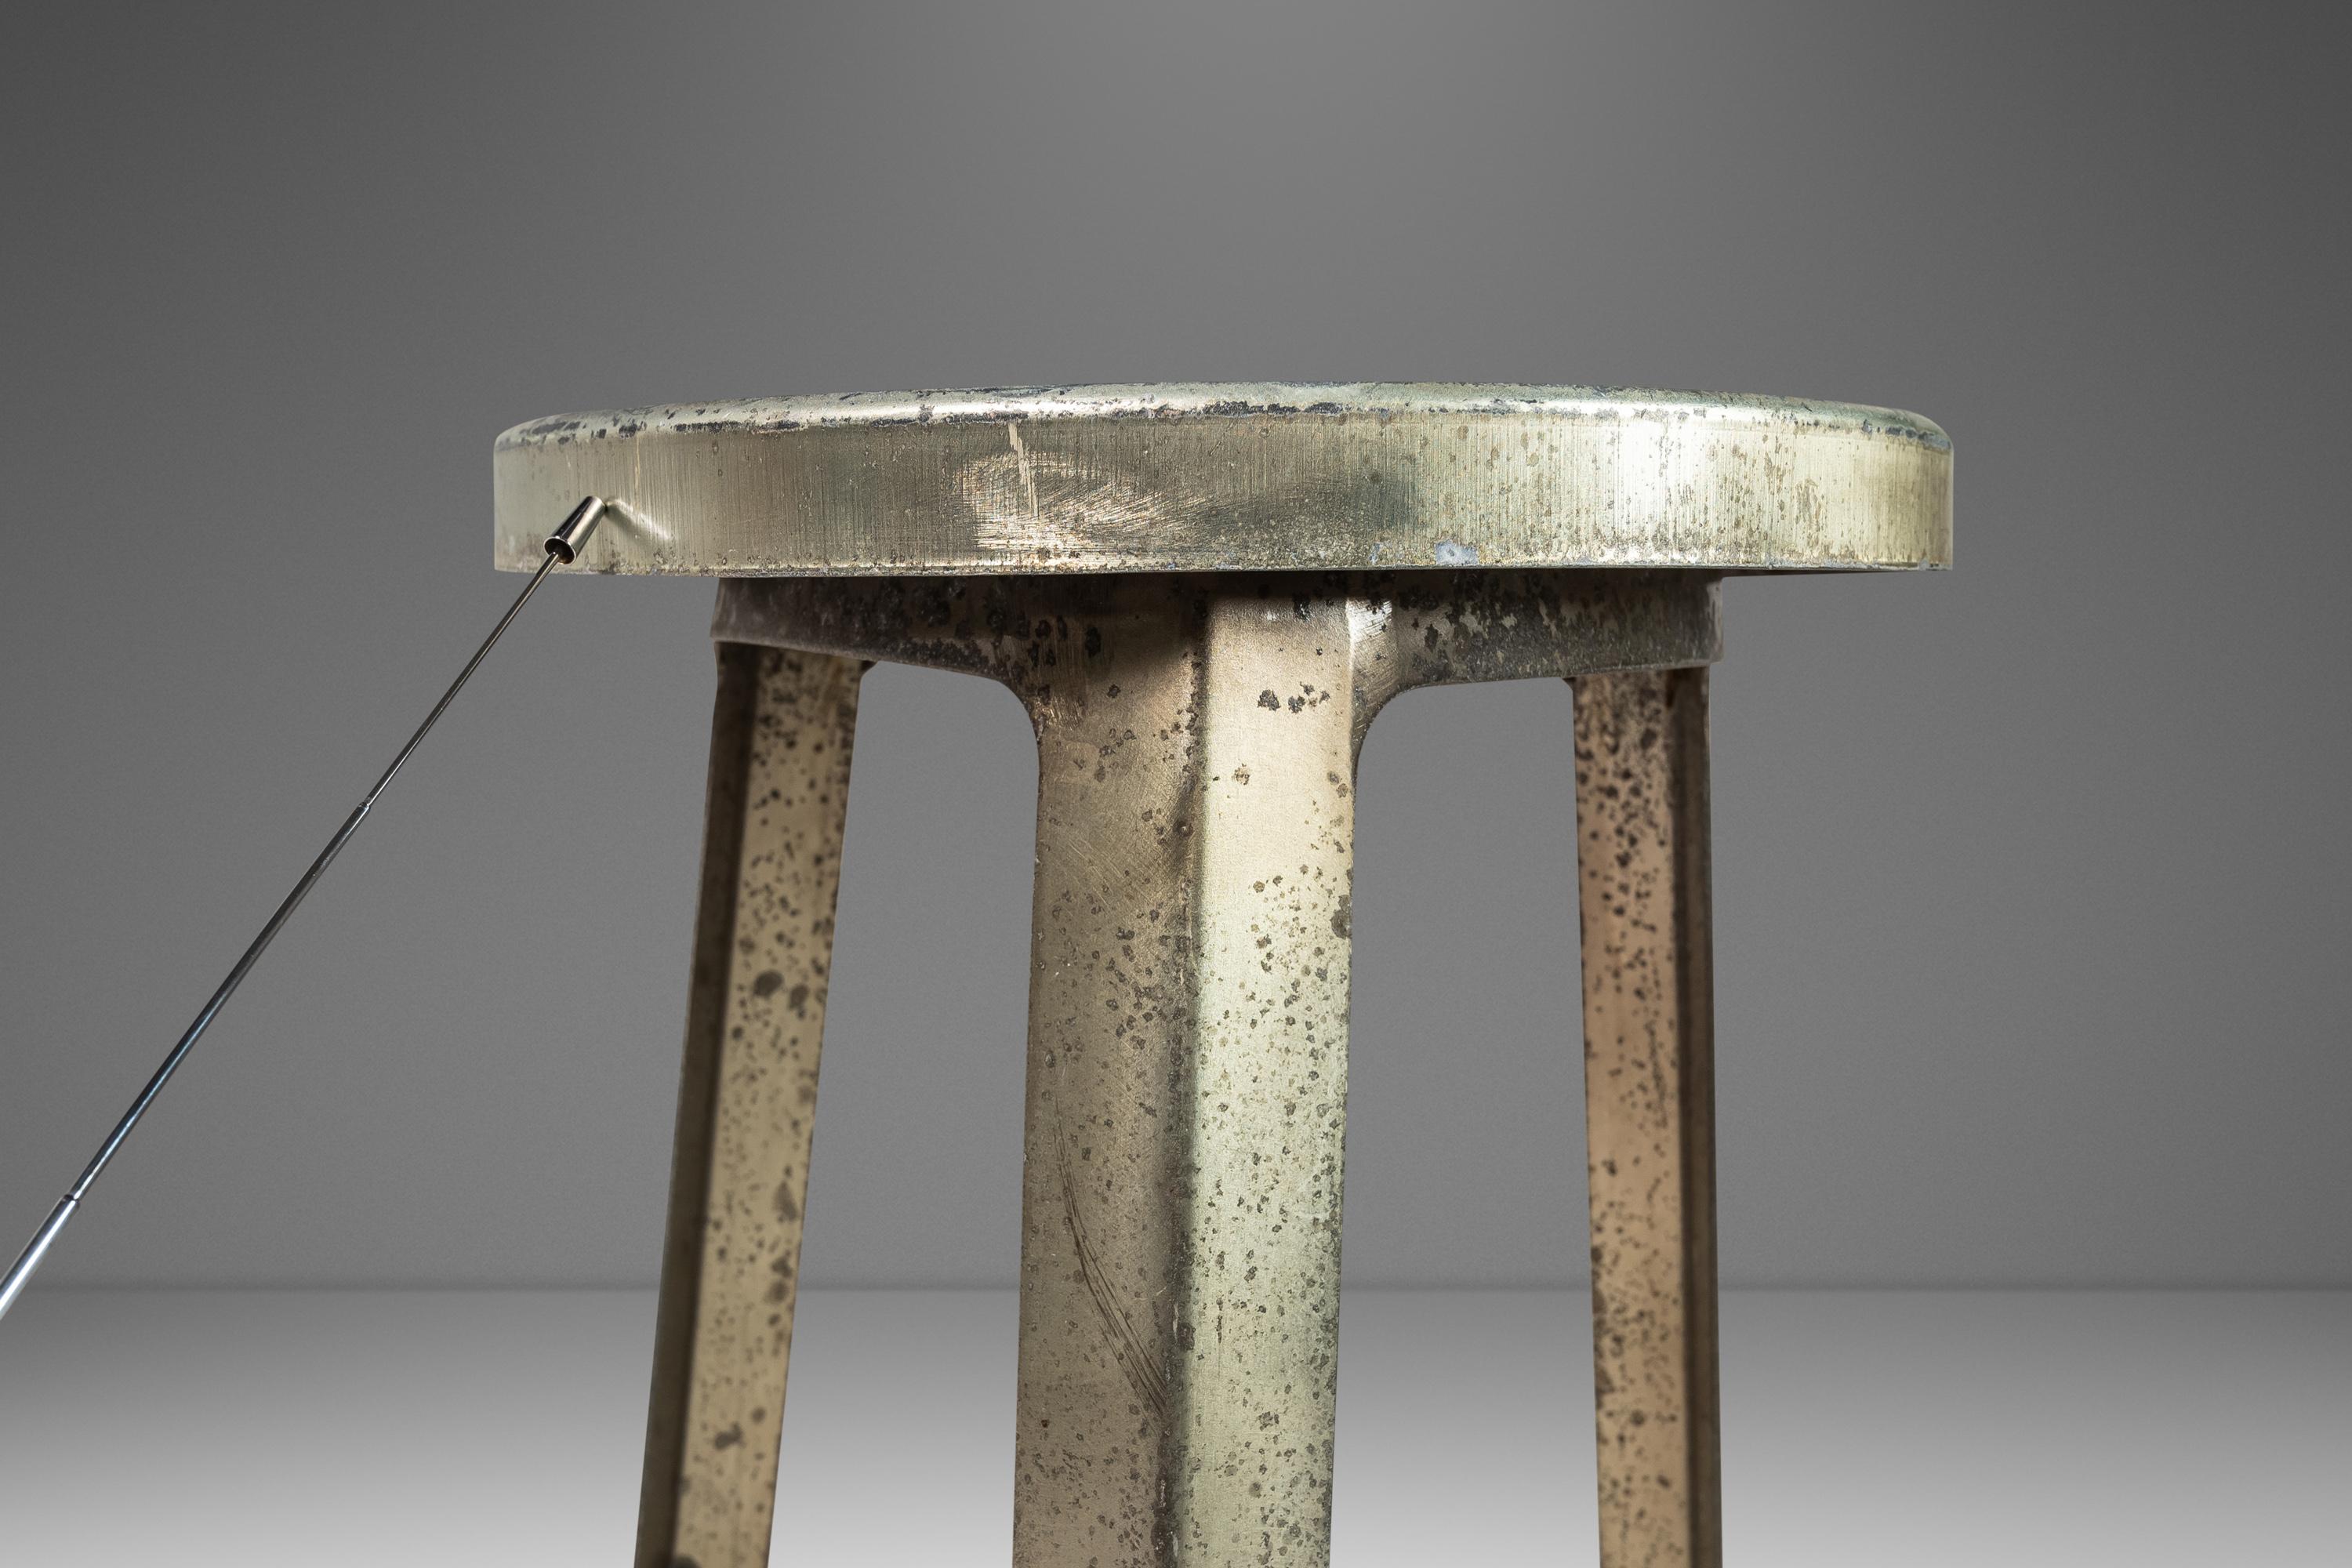 French Set of Four '4' Hammered Industrial Counter Height Bar Stools, France, C. 1950s For Sale